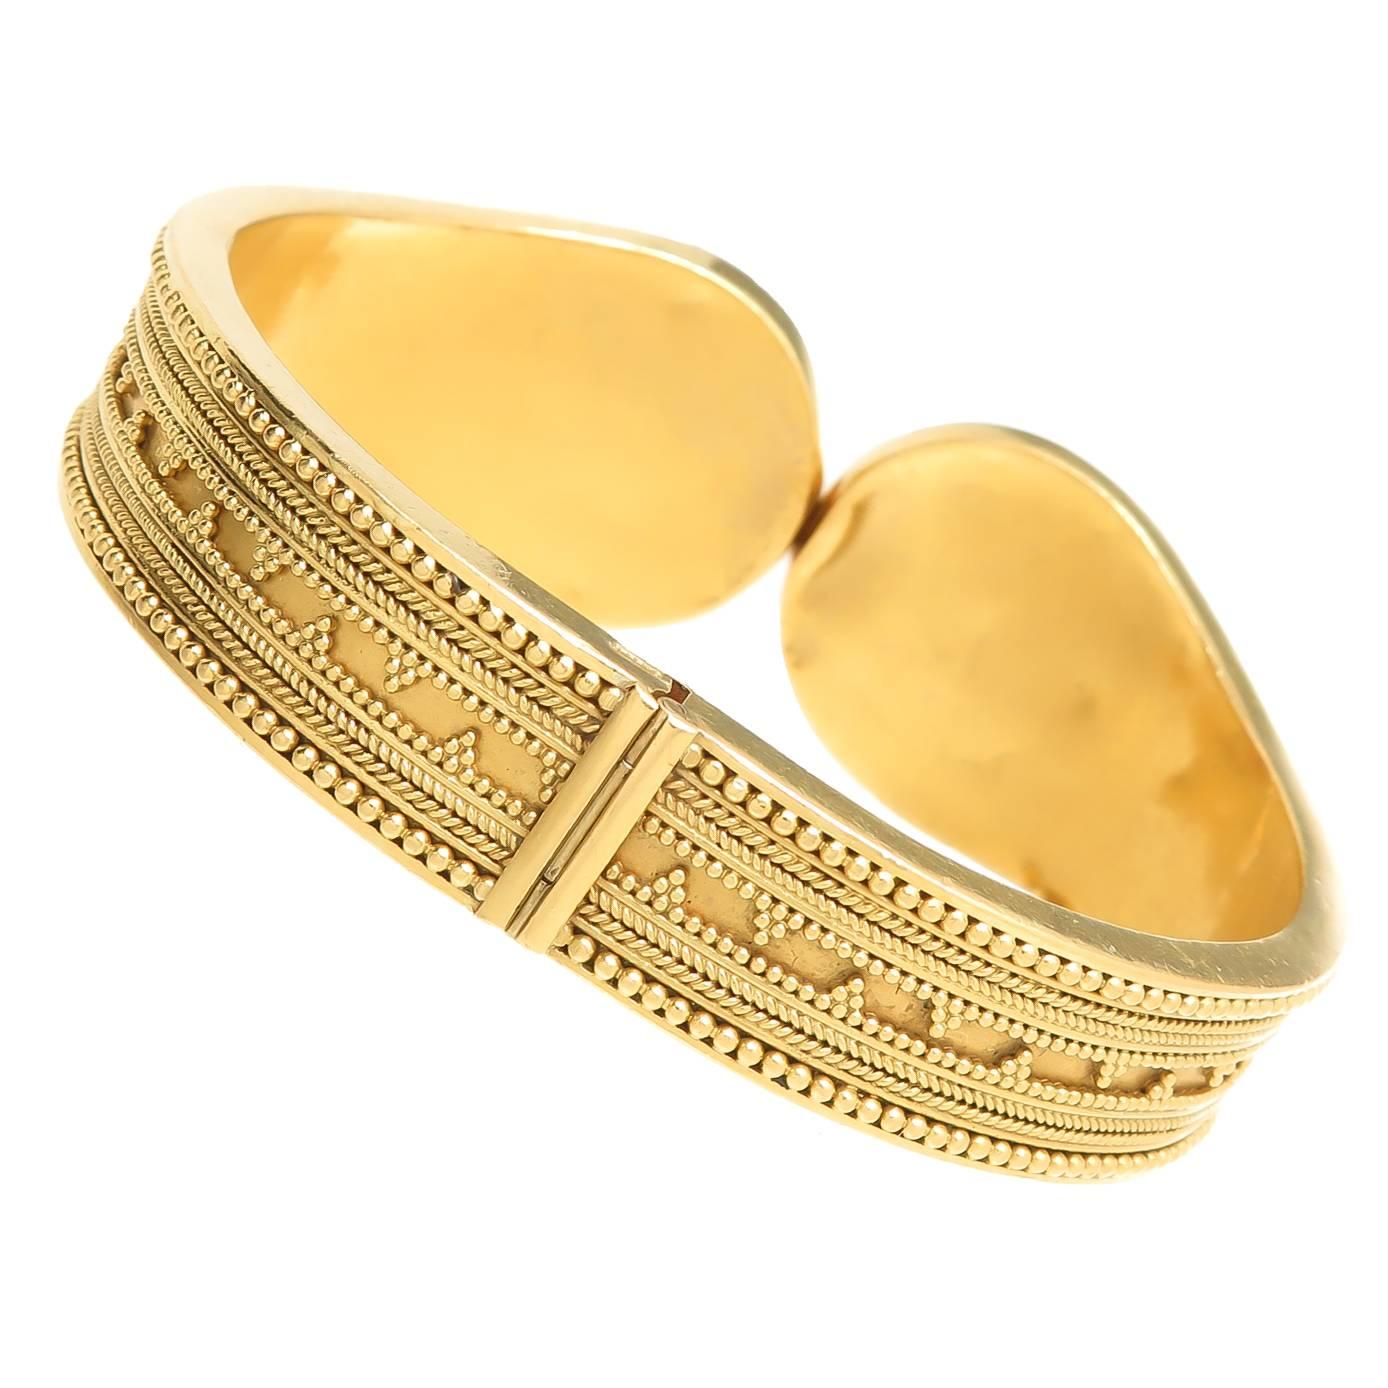 Circa 1990 Lalaounis 18K yellow Gold bangle-cuff bracelet in an ancient Greek motif with granulation accents that Lalaounis  is famous for. Having very good weight at 50 Grams and measuring 1 inch wide at the top center, inside measurement is 6 1/2